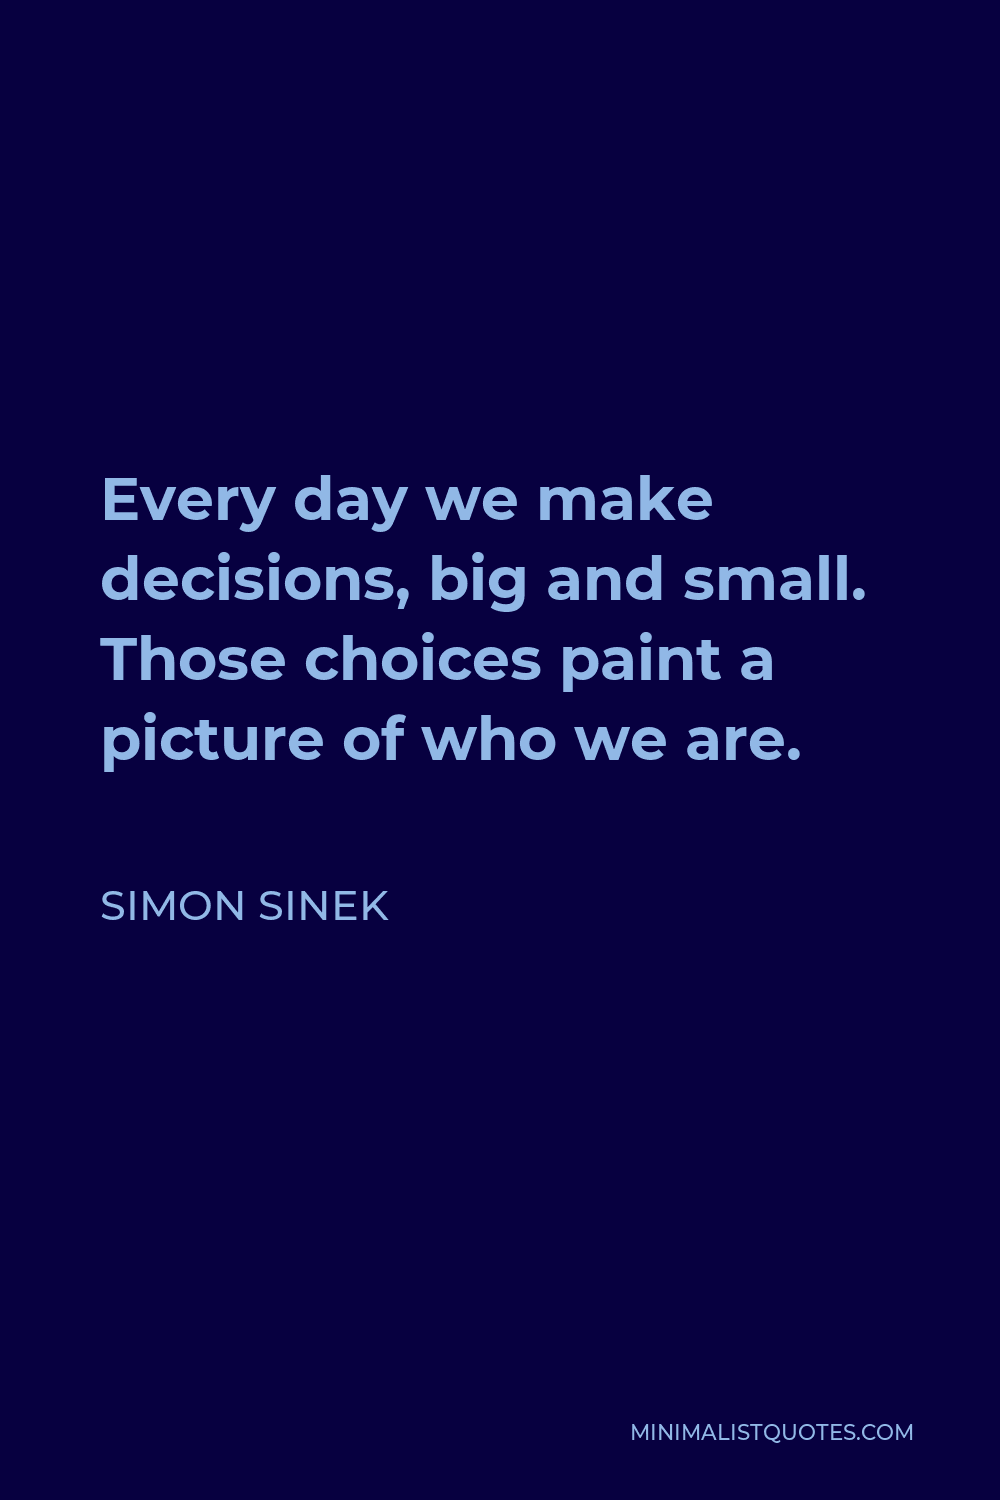 Simon Sinek Quote - Every day we make decisions, big and small. Those choices paint a picture of who we are.